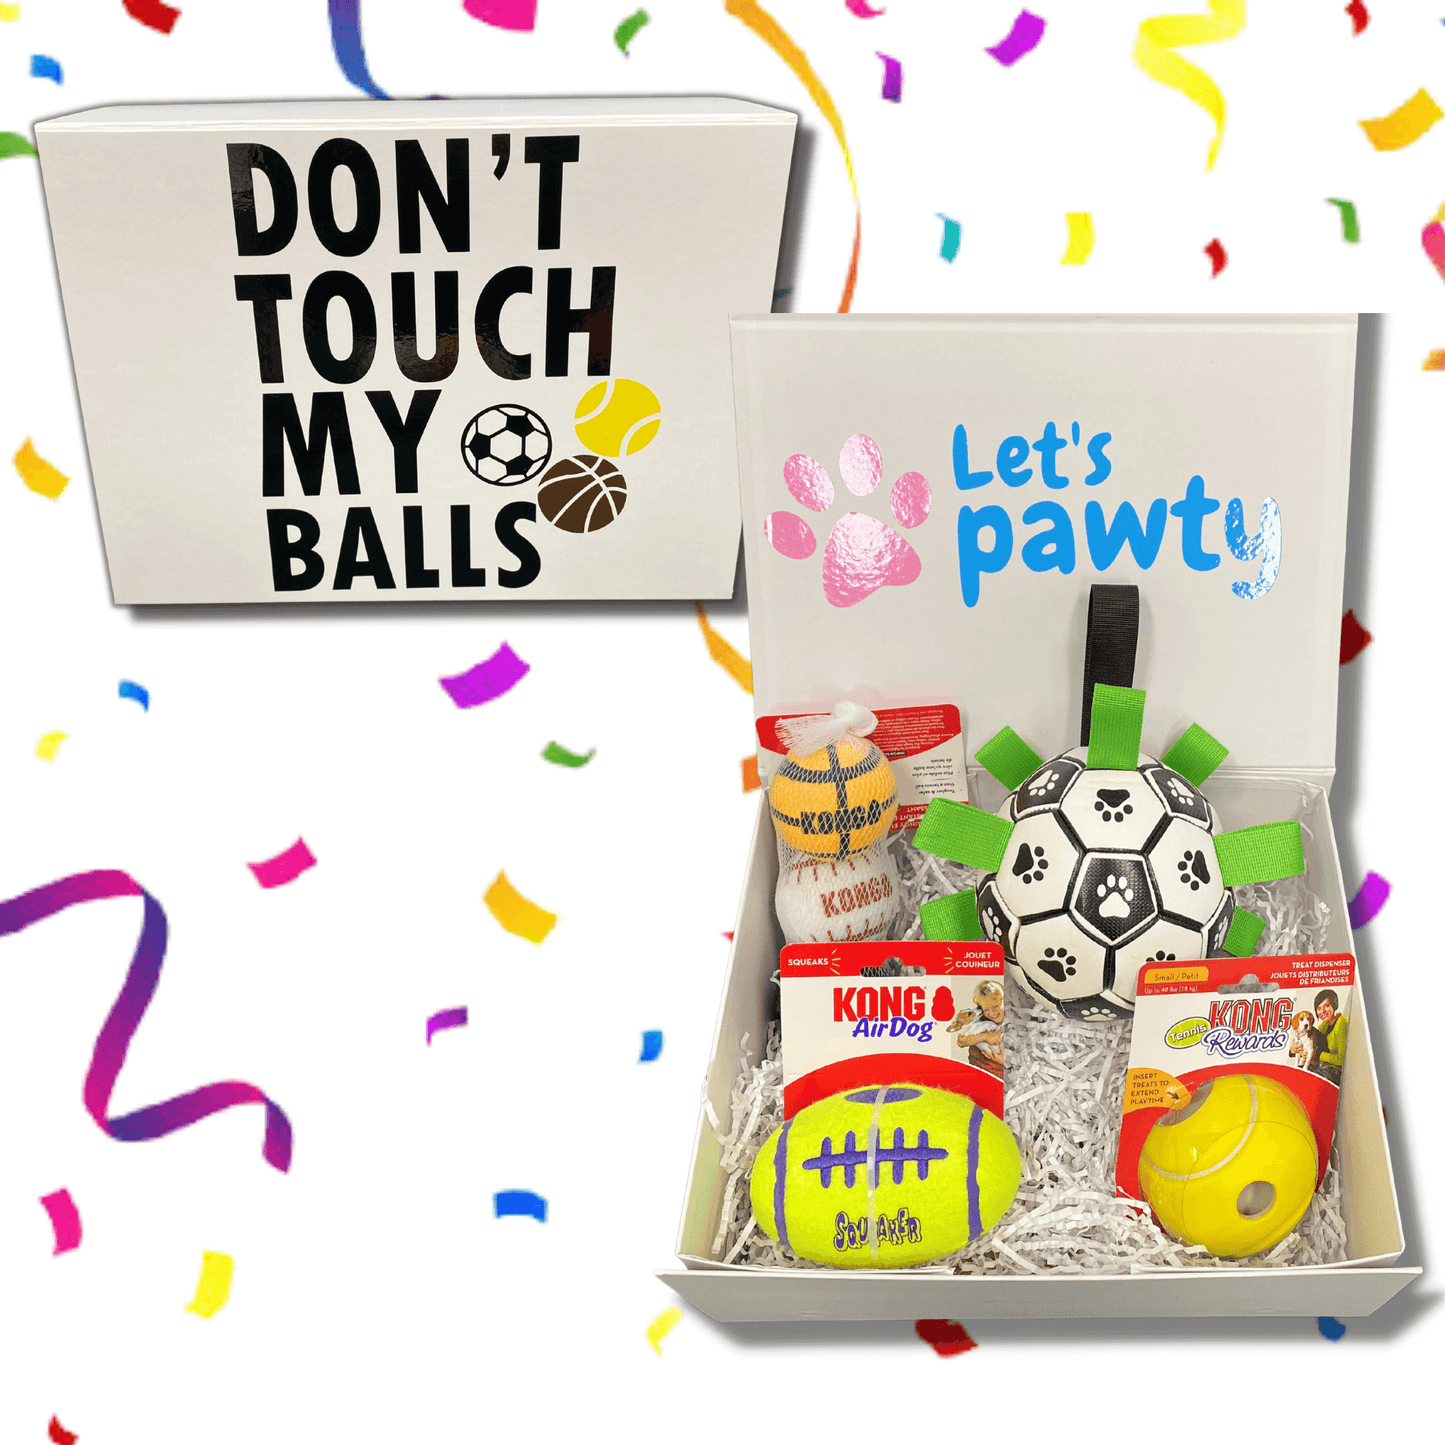 Dog lovers ball, interactive dog toy, fetch ball, sport ball, dog gift box, let's pawty